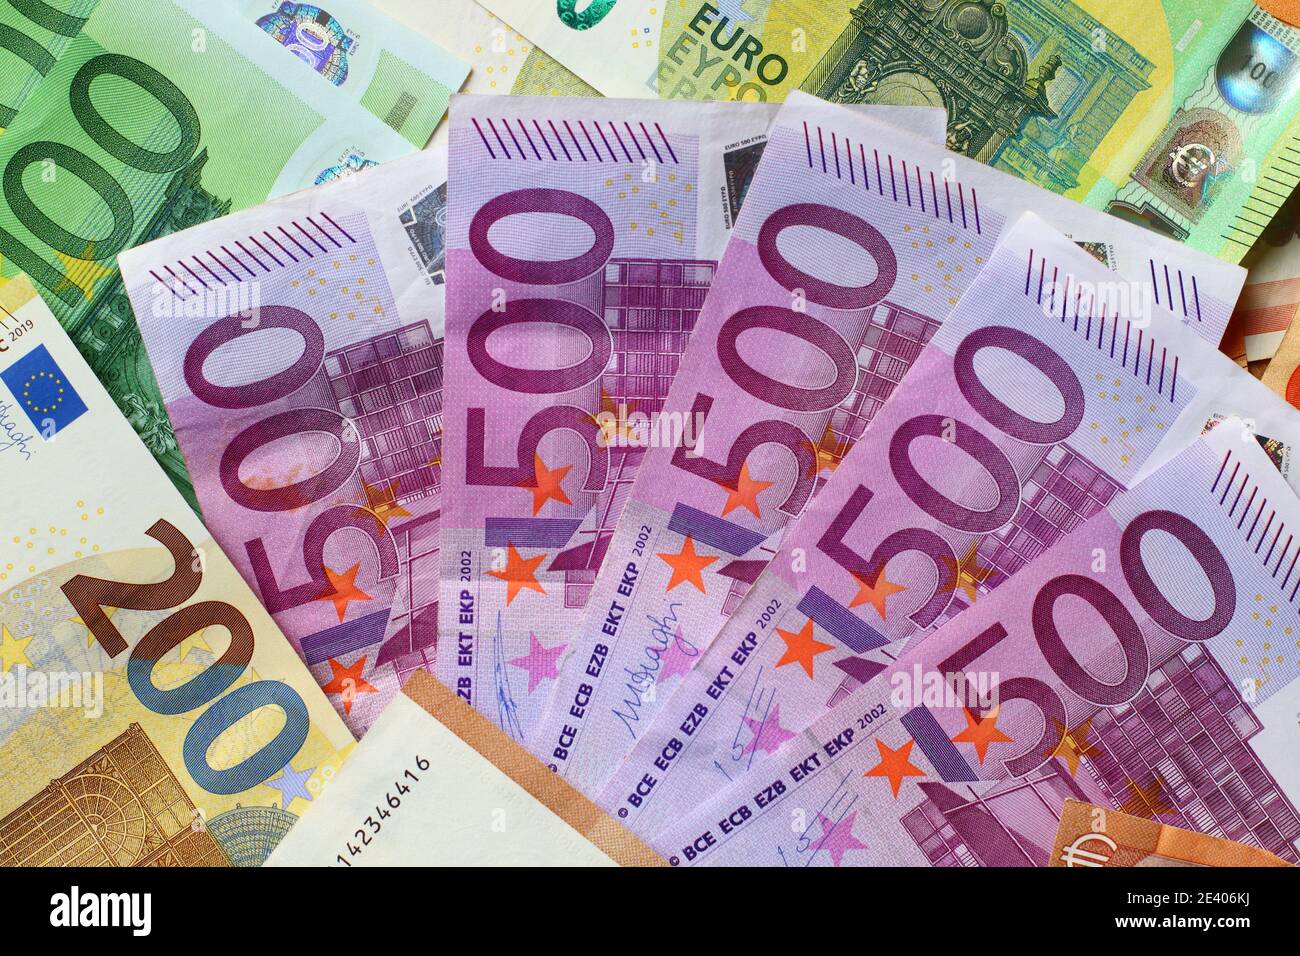 Euro currency banknotes background. European paper money texture with 100, 200 and 500 euros bills. Stock Photo